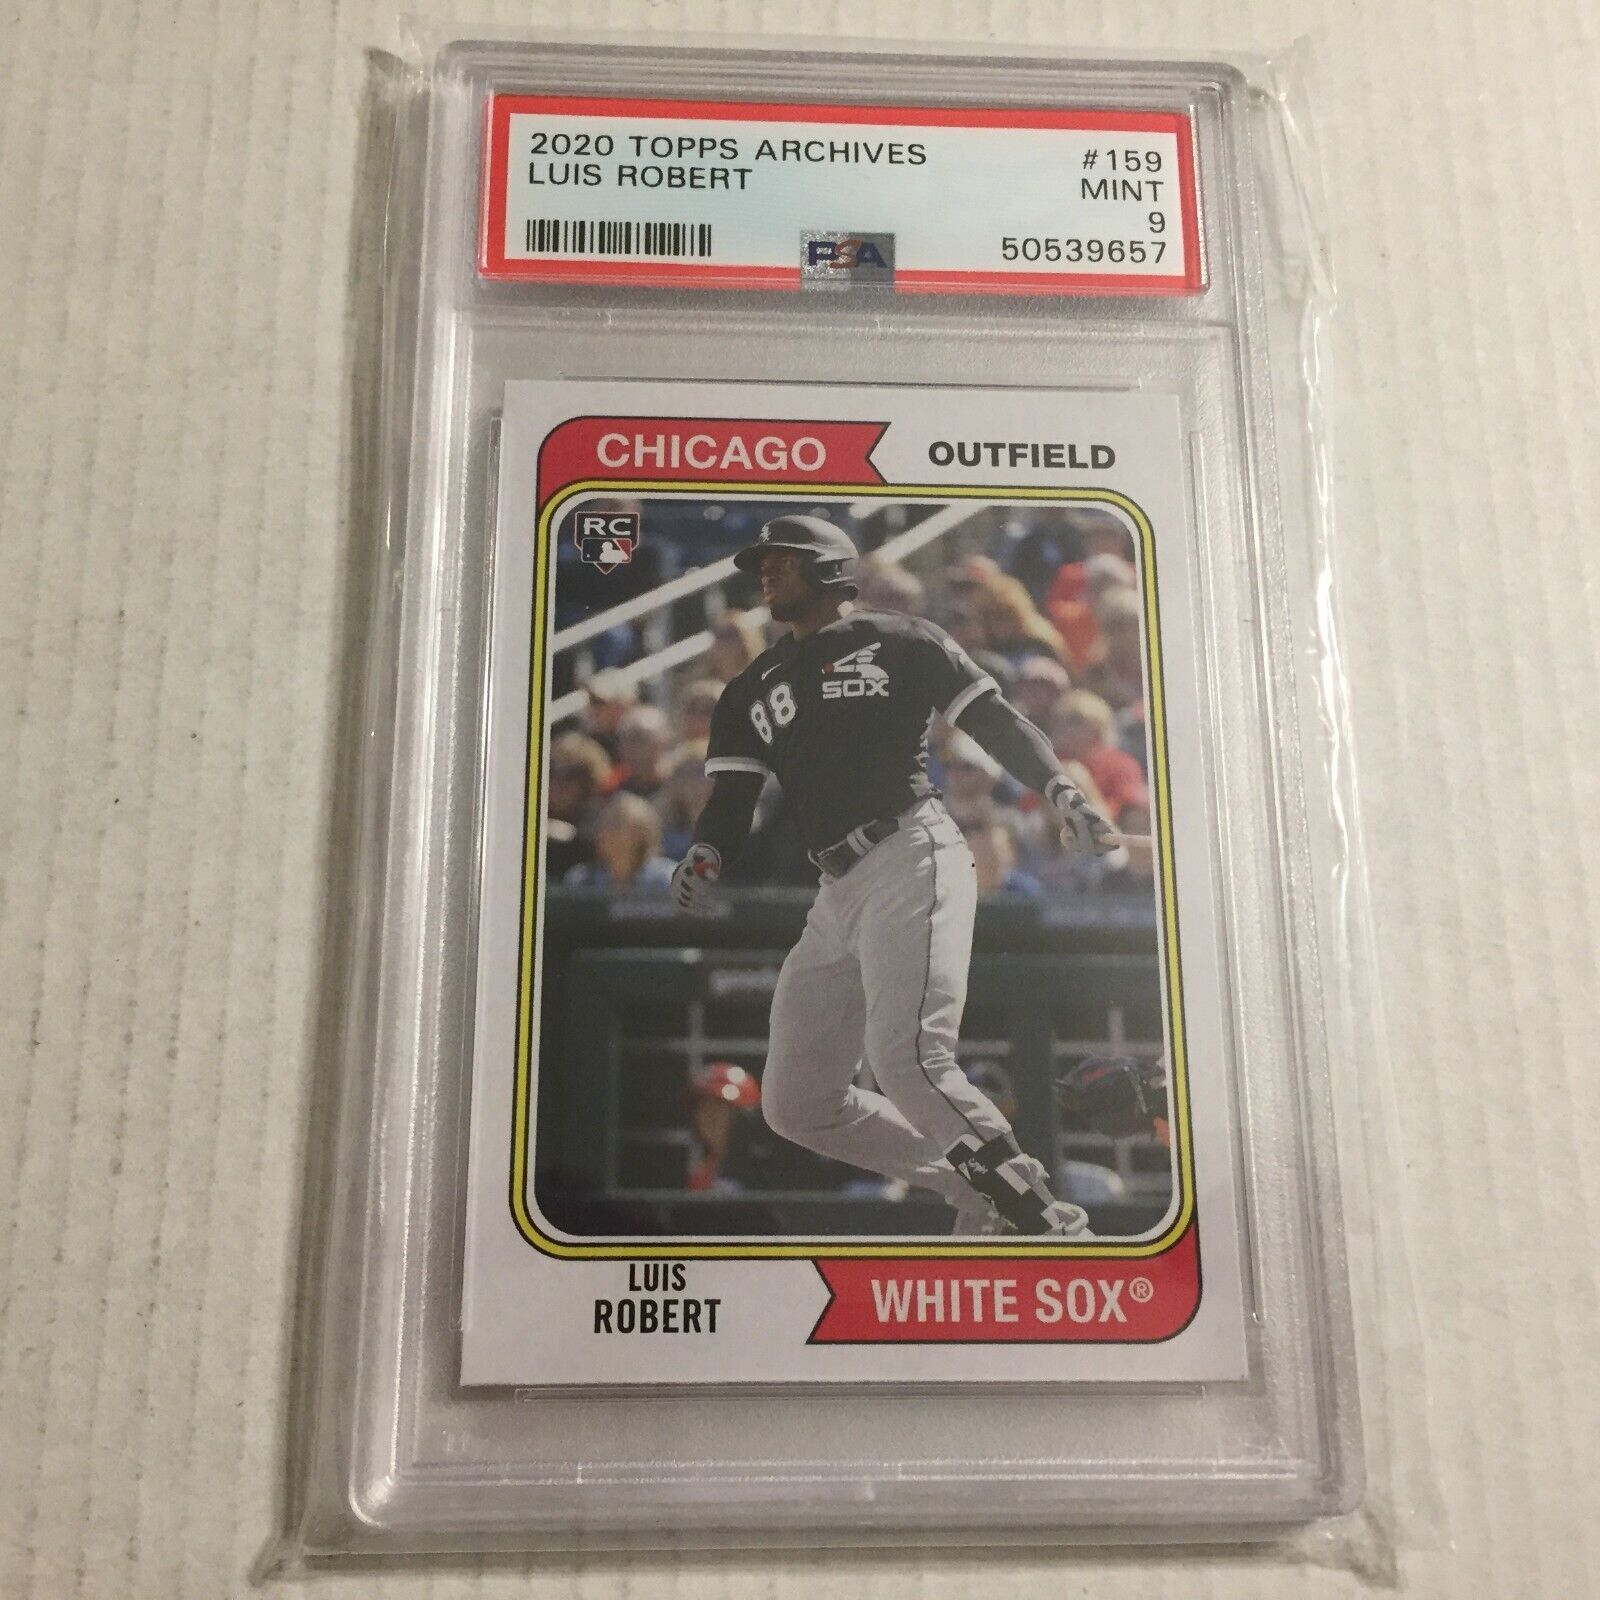 2020 Topps Archives Chicago White Sox Luis Robert Rookie Card #159 PSA MT 9.0 - $37.95